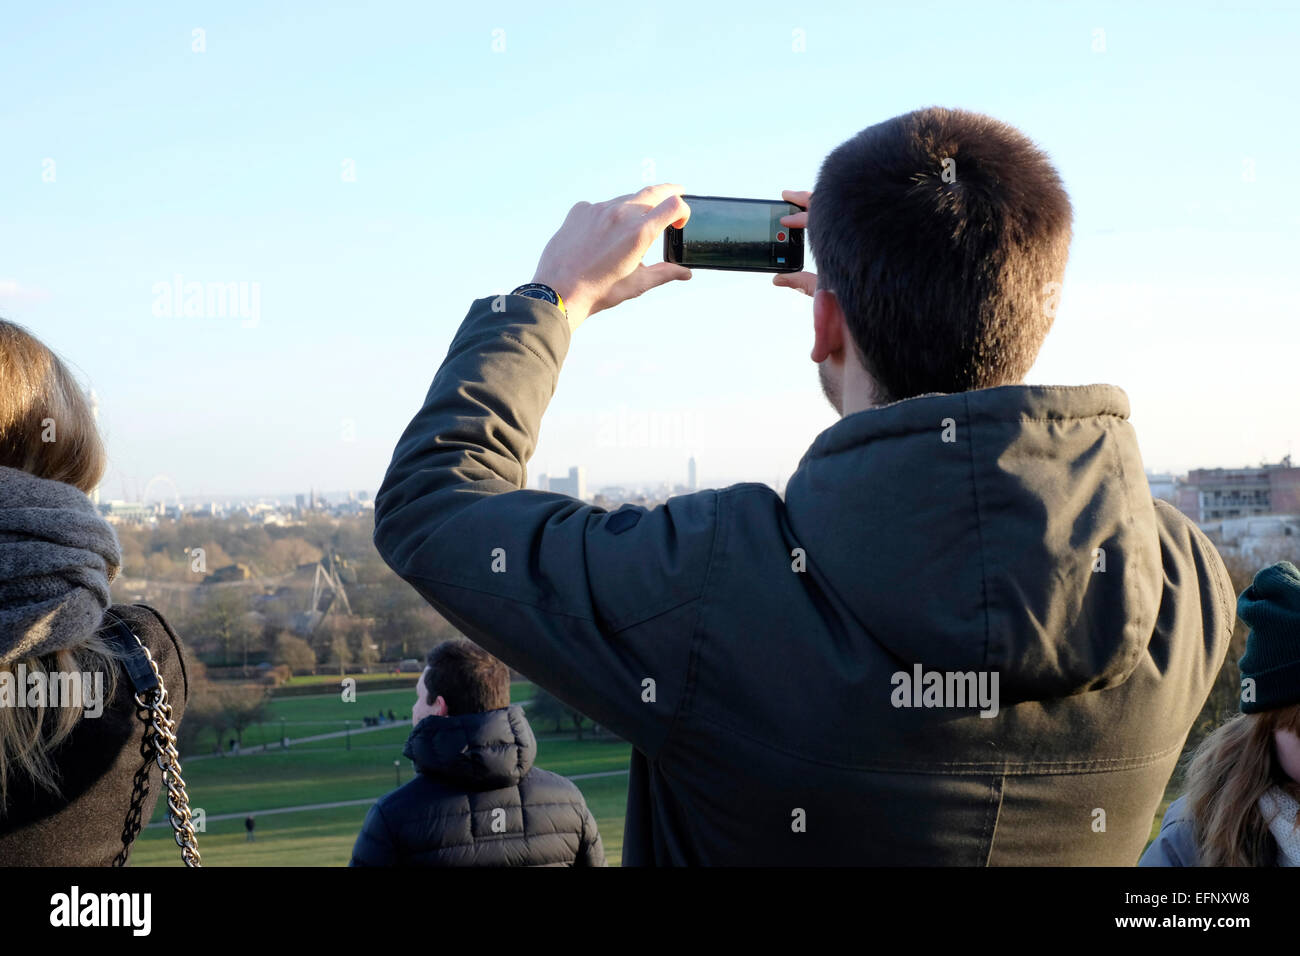 A man taking photos with a smart phone in Primrose Hill, London Stock Photo